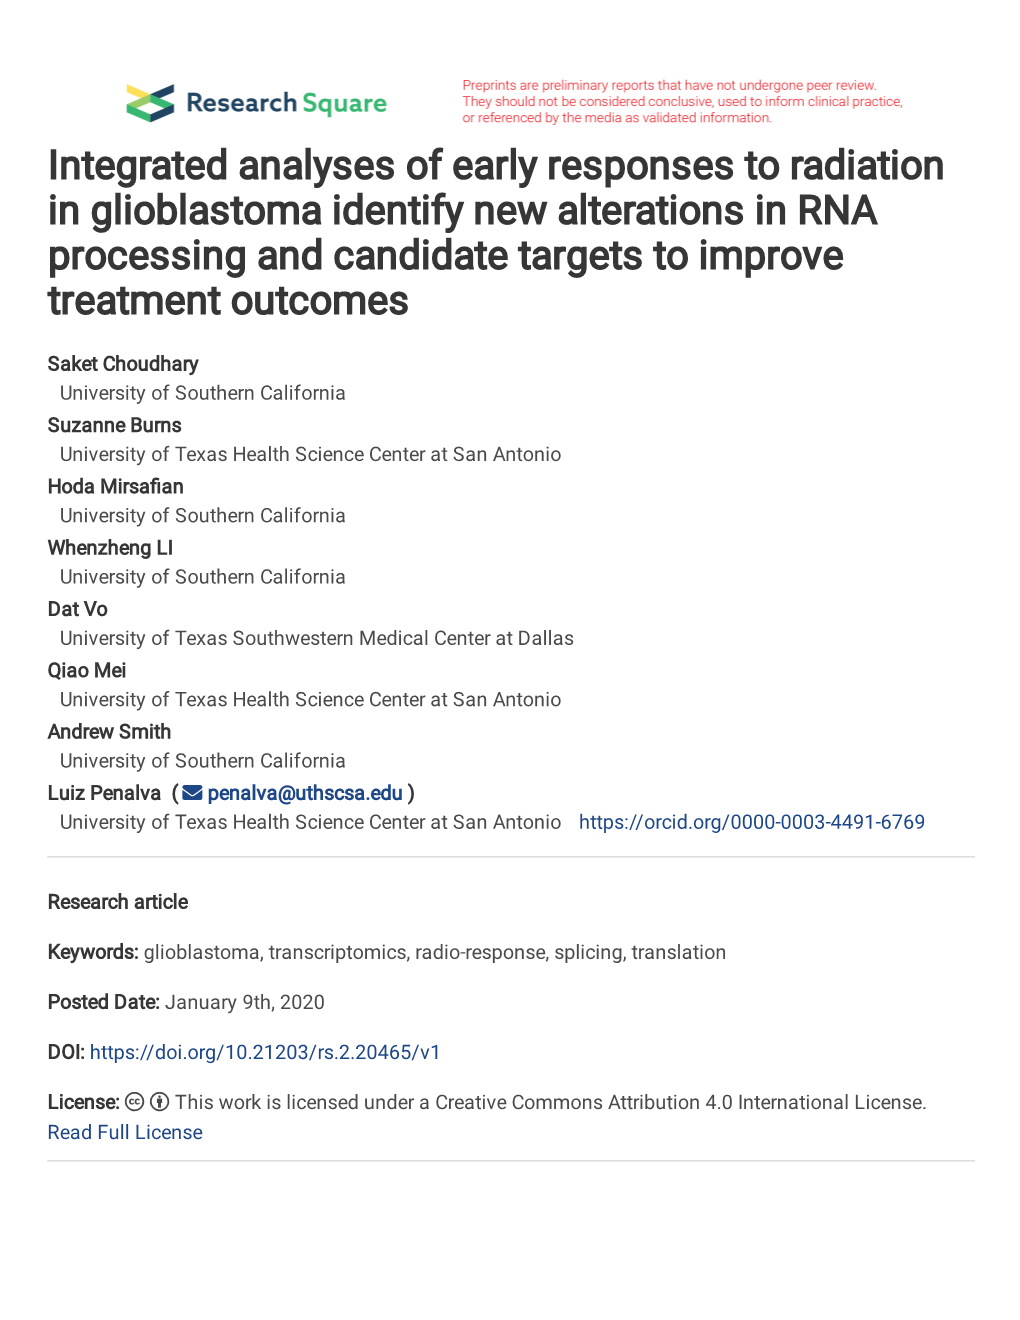 Integrated Analyses of Early Responses to Radiation in Glioblastoma Identify New Alterations in RNA Processing and Candidate Targets to Improve Treatment Outcomes